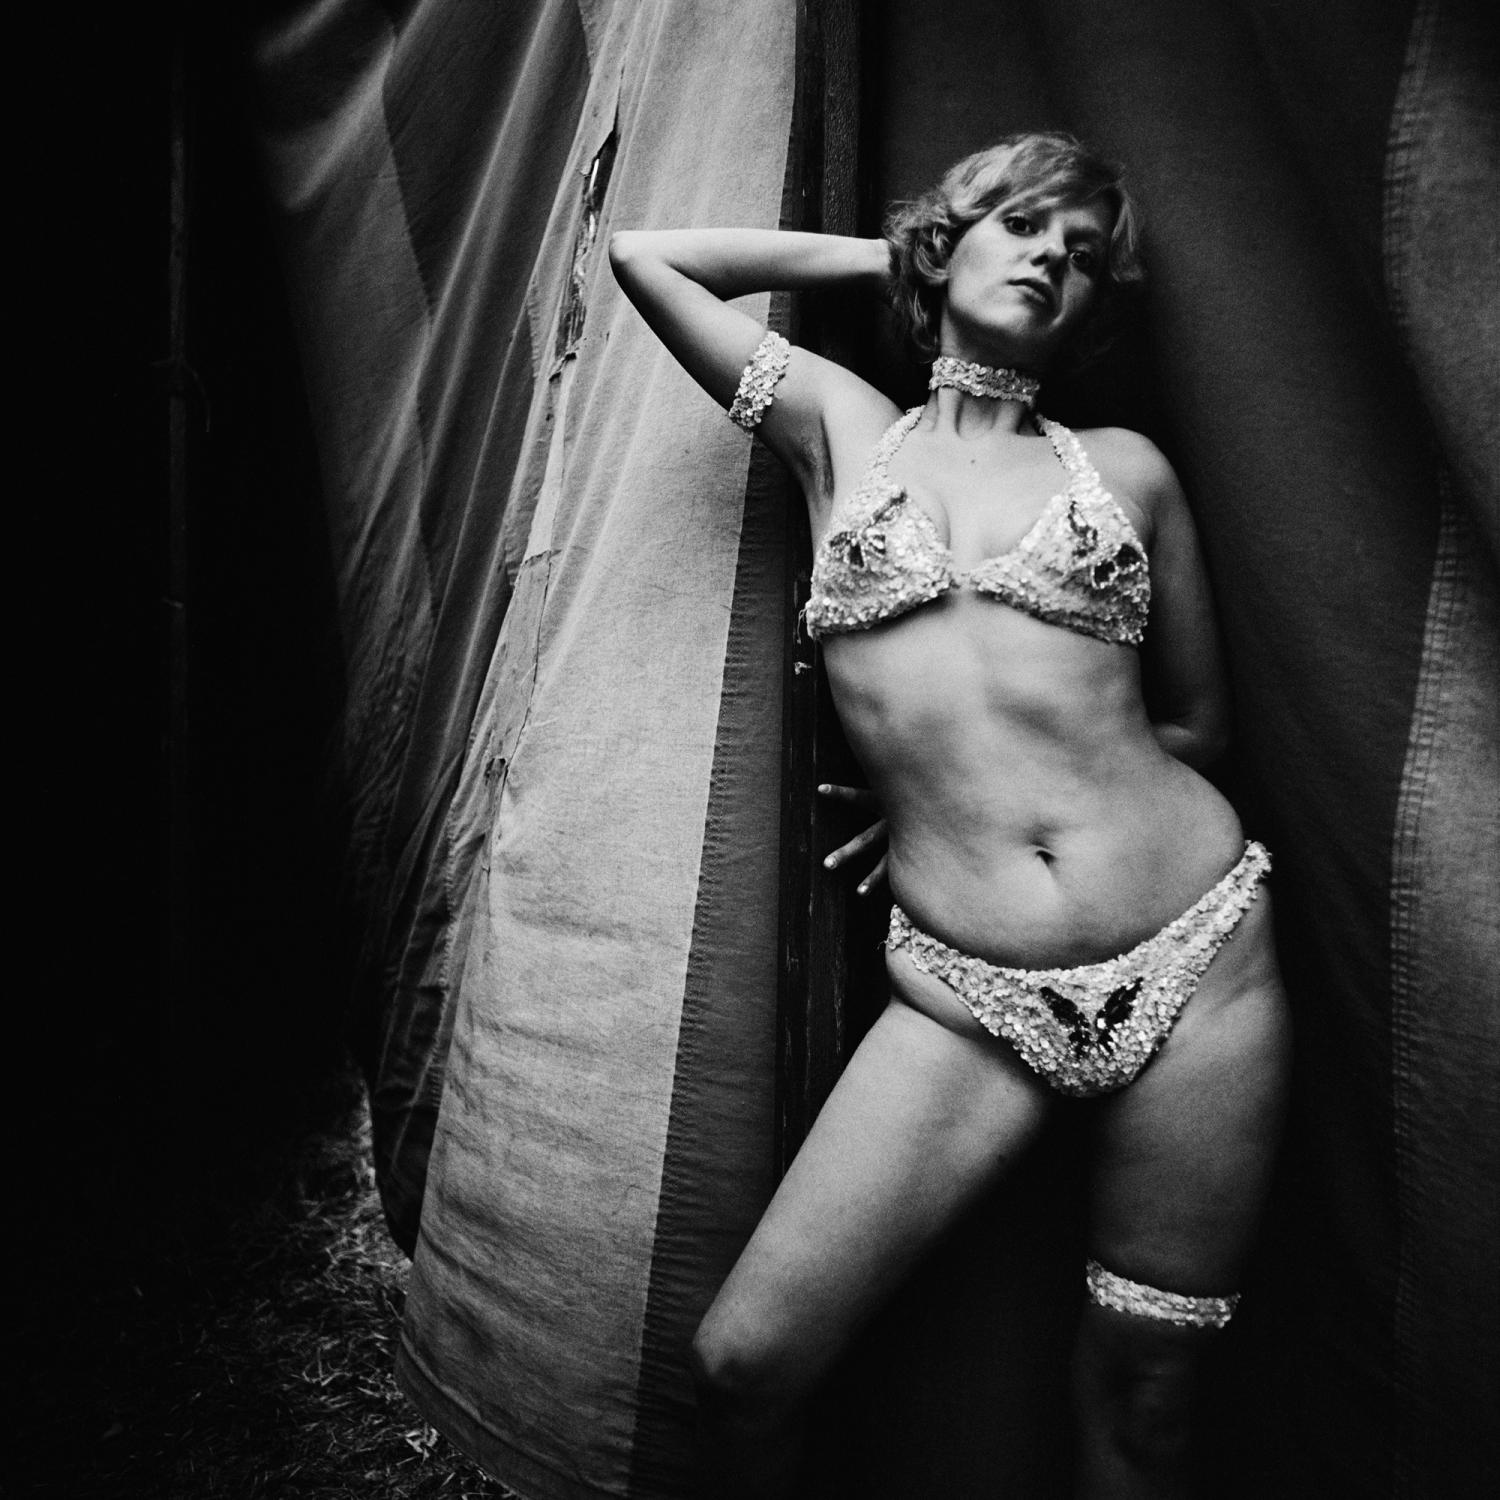 Carnival Strippers Portraits